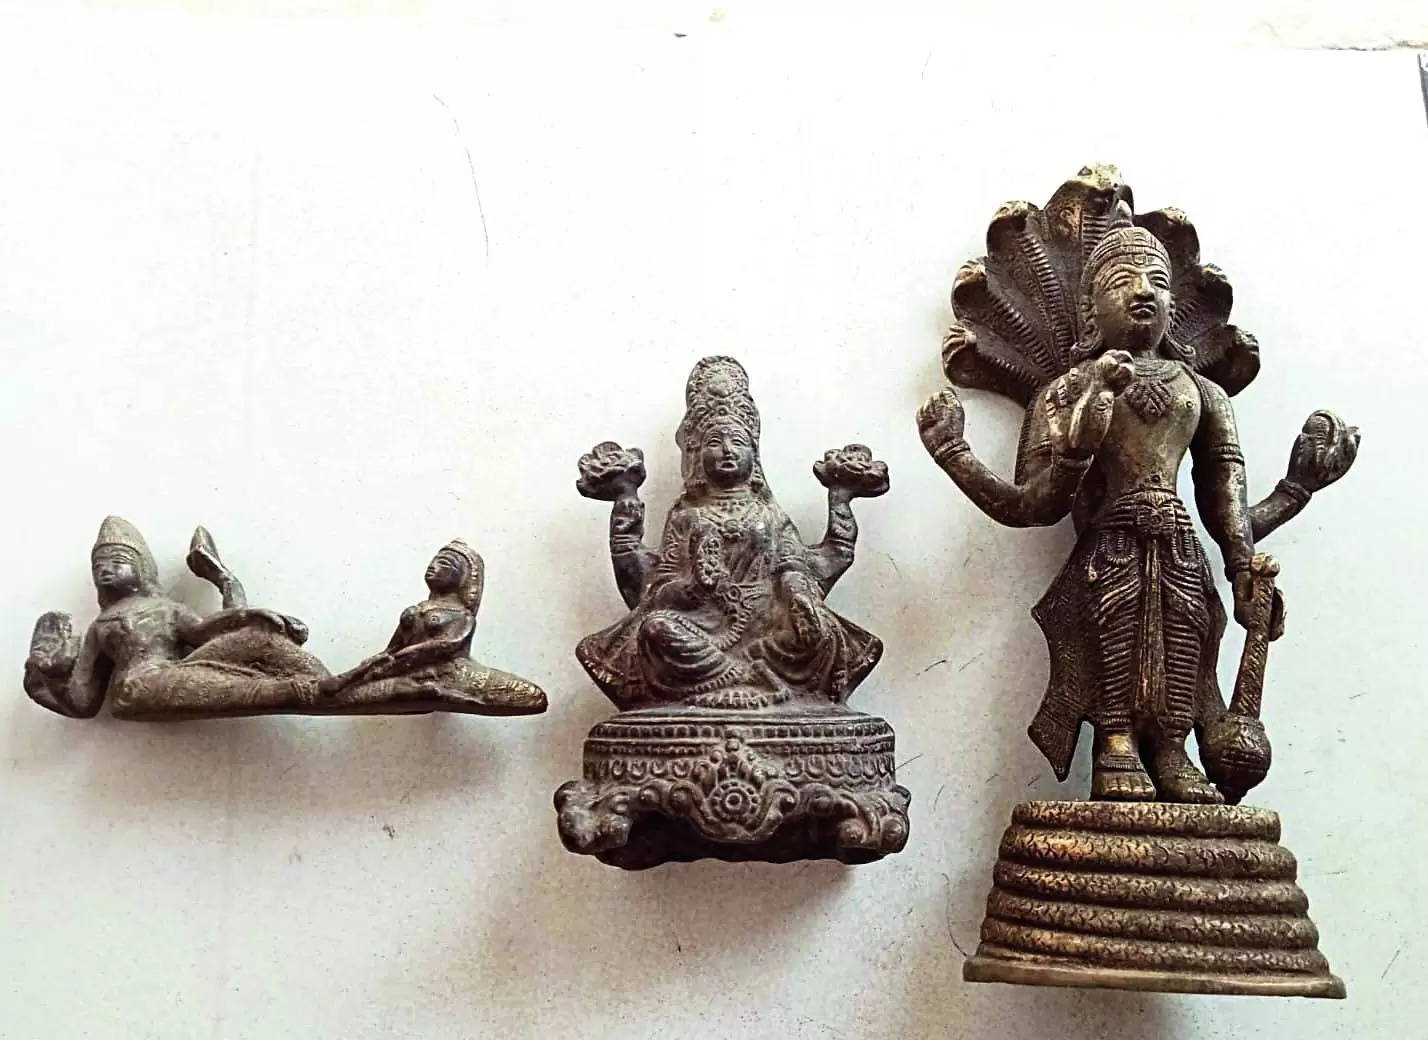 Doc digs plot for borewell, finds ‘400-yr-old’ idols